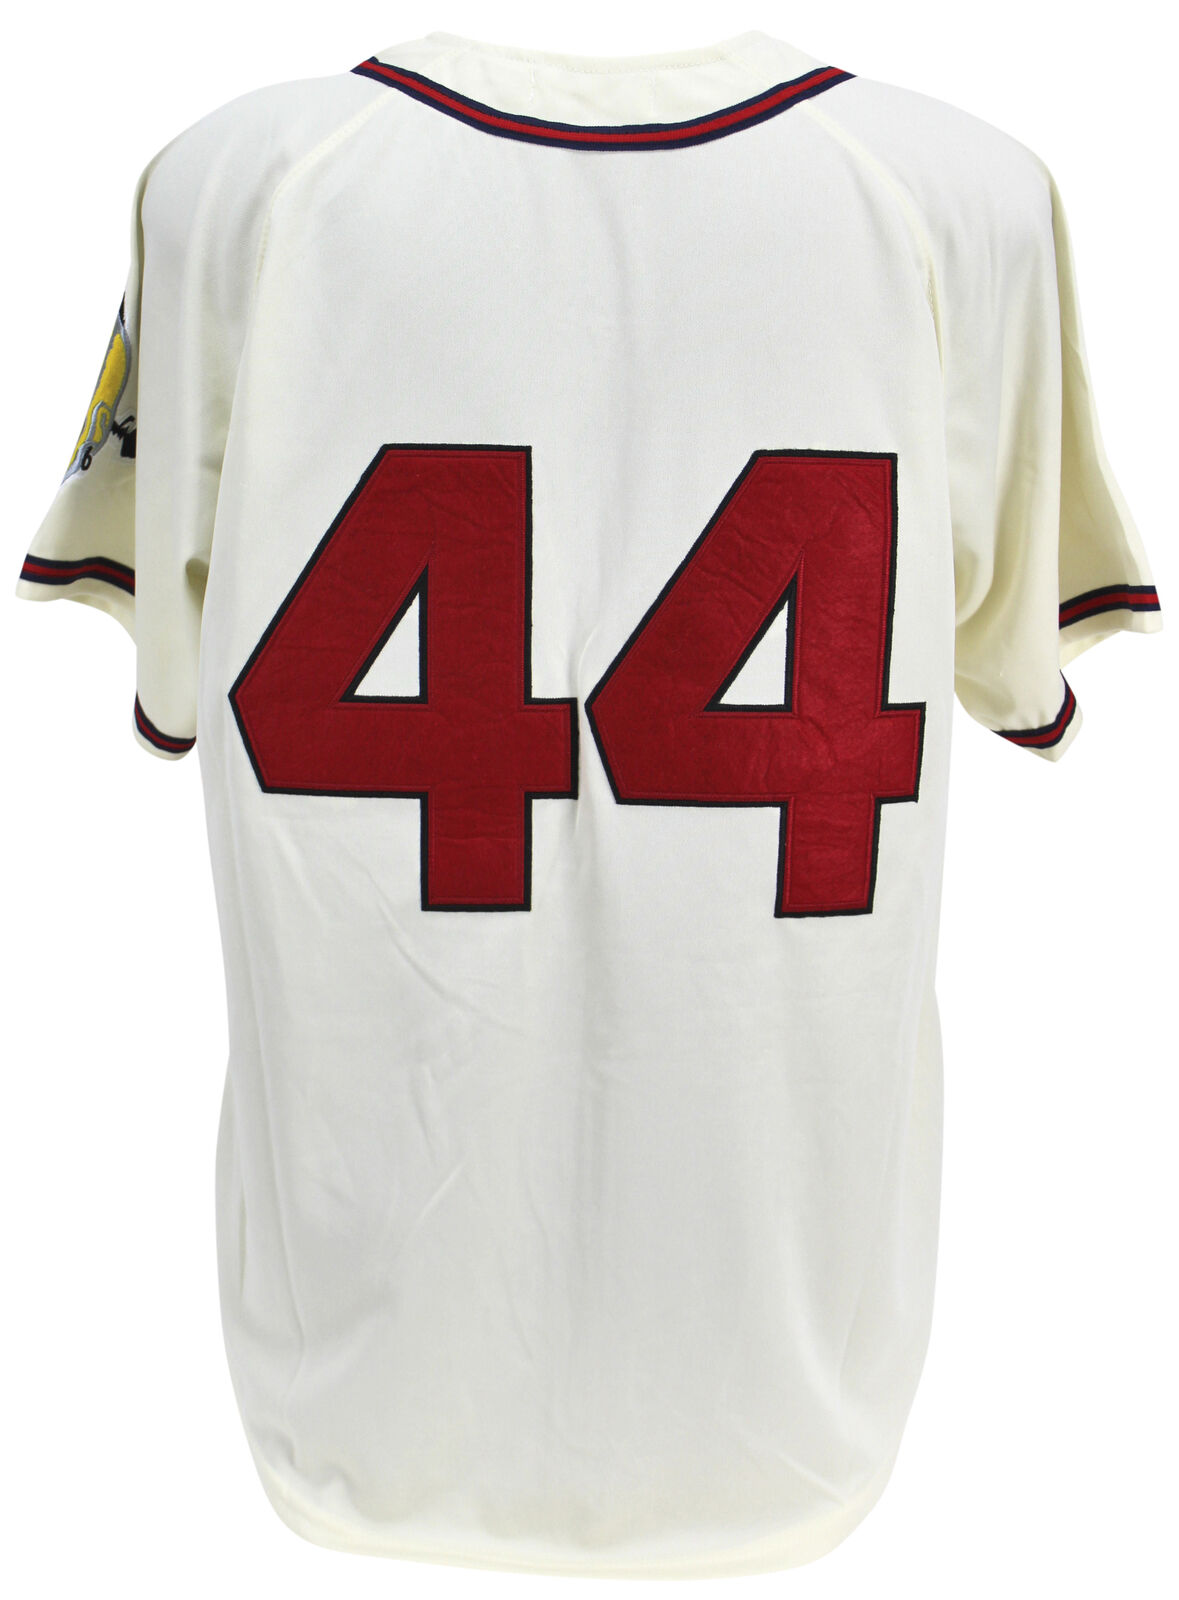 Hank Aaron Signed Braves Authentic Mitchell & Ness Jersey (Steiner